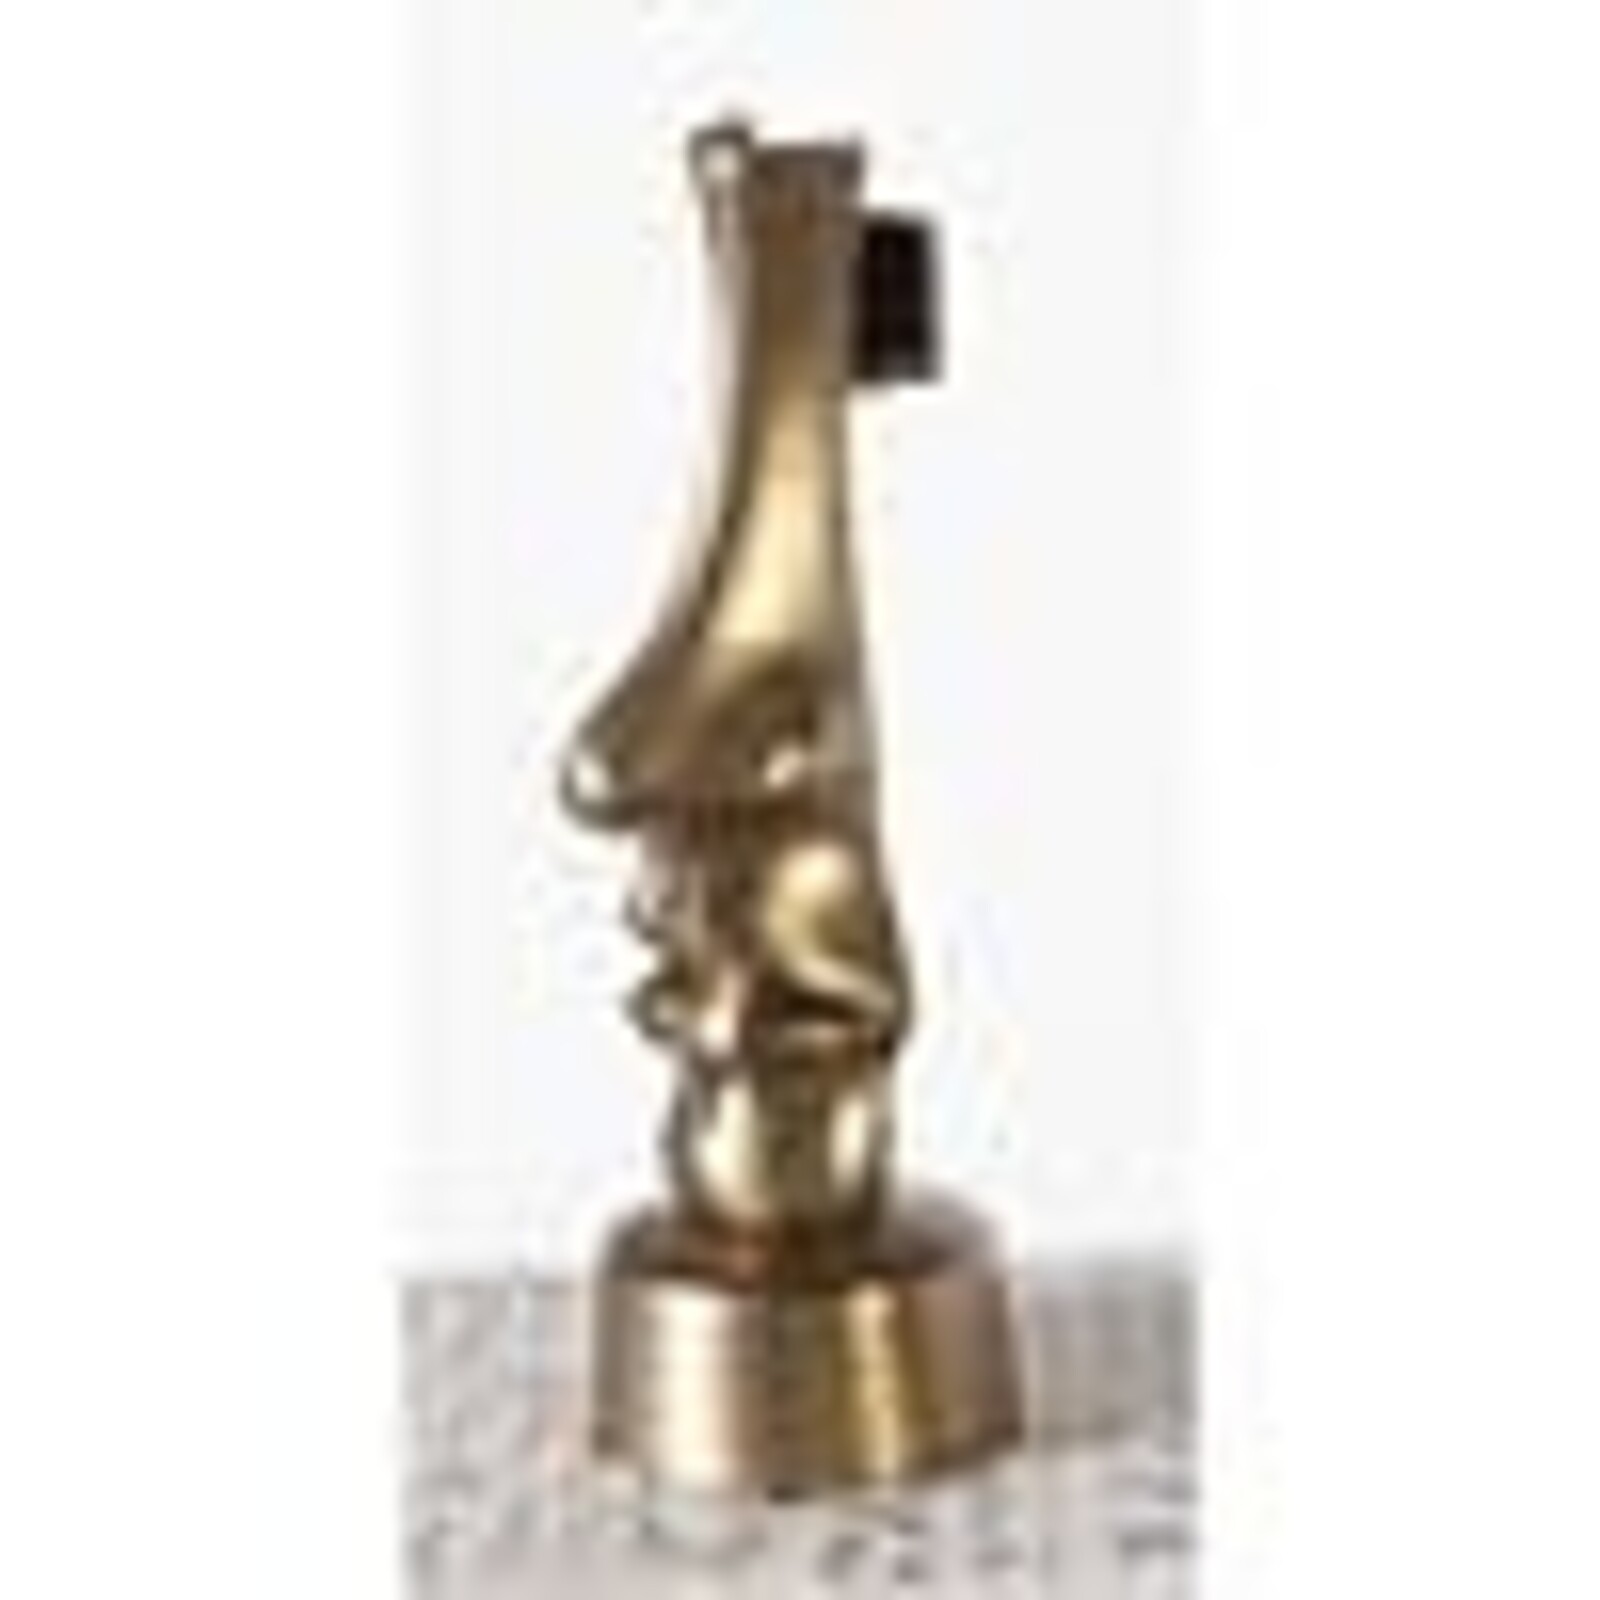 Uttermost HER EYES HAVE IT - BRASS    R17689 loading=